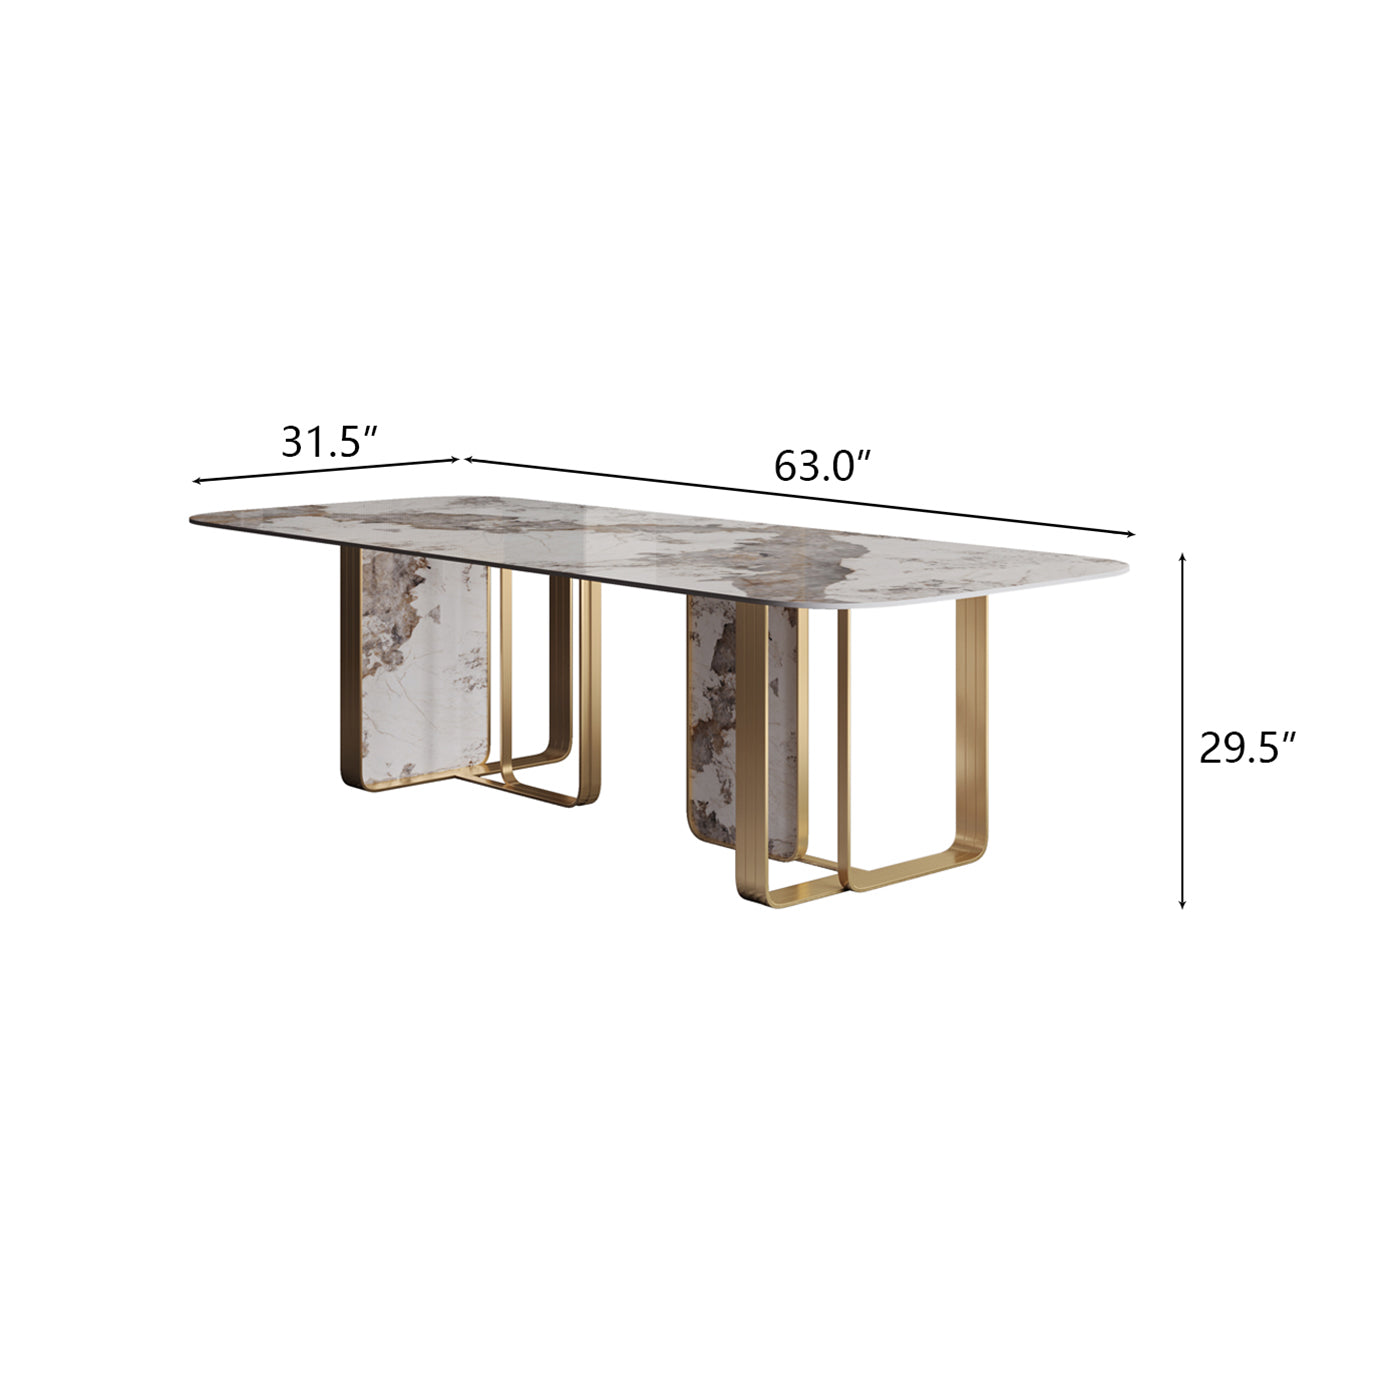 Modern Luxe Marble Dining Table with White Rectangular Tabletop, Gold Stainless Legs, Dining Room Table for 4-6